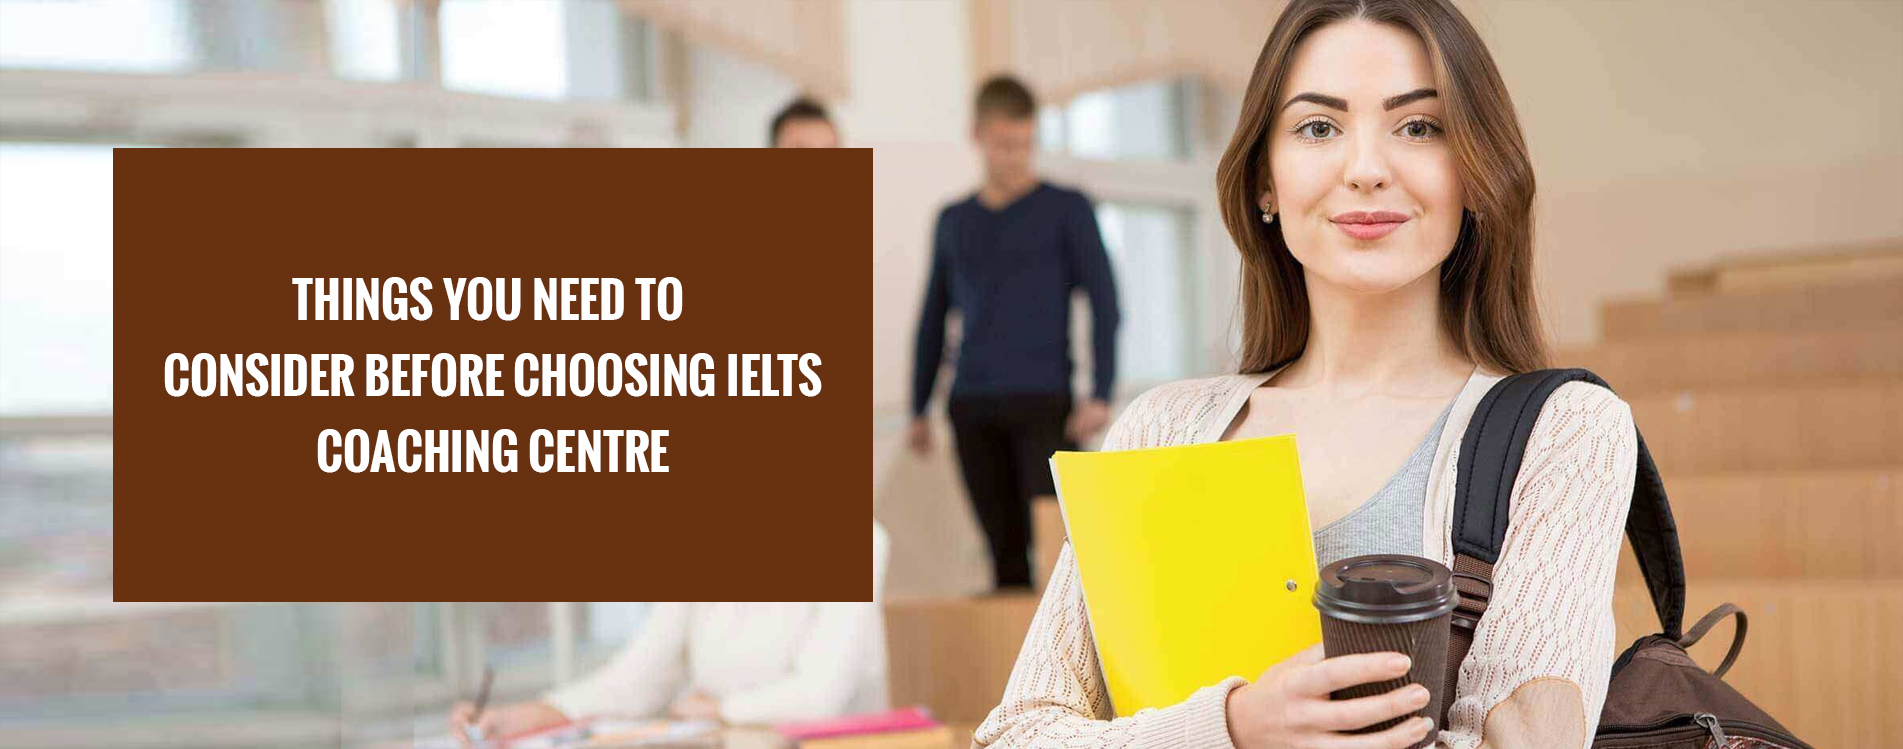 Things You Need to Consider Before Choosing IELTS Coaching Centre